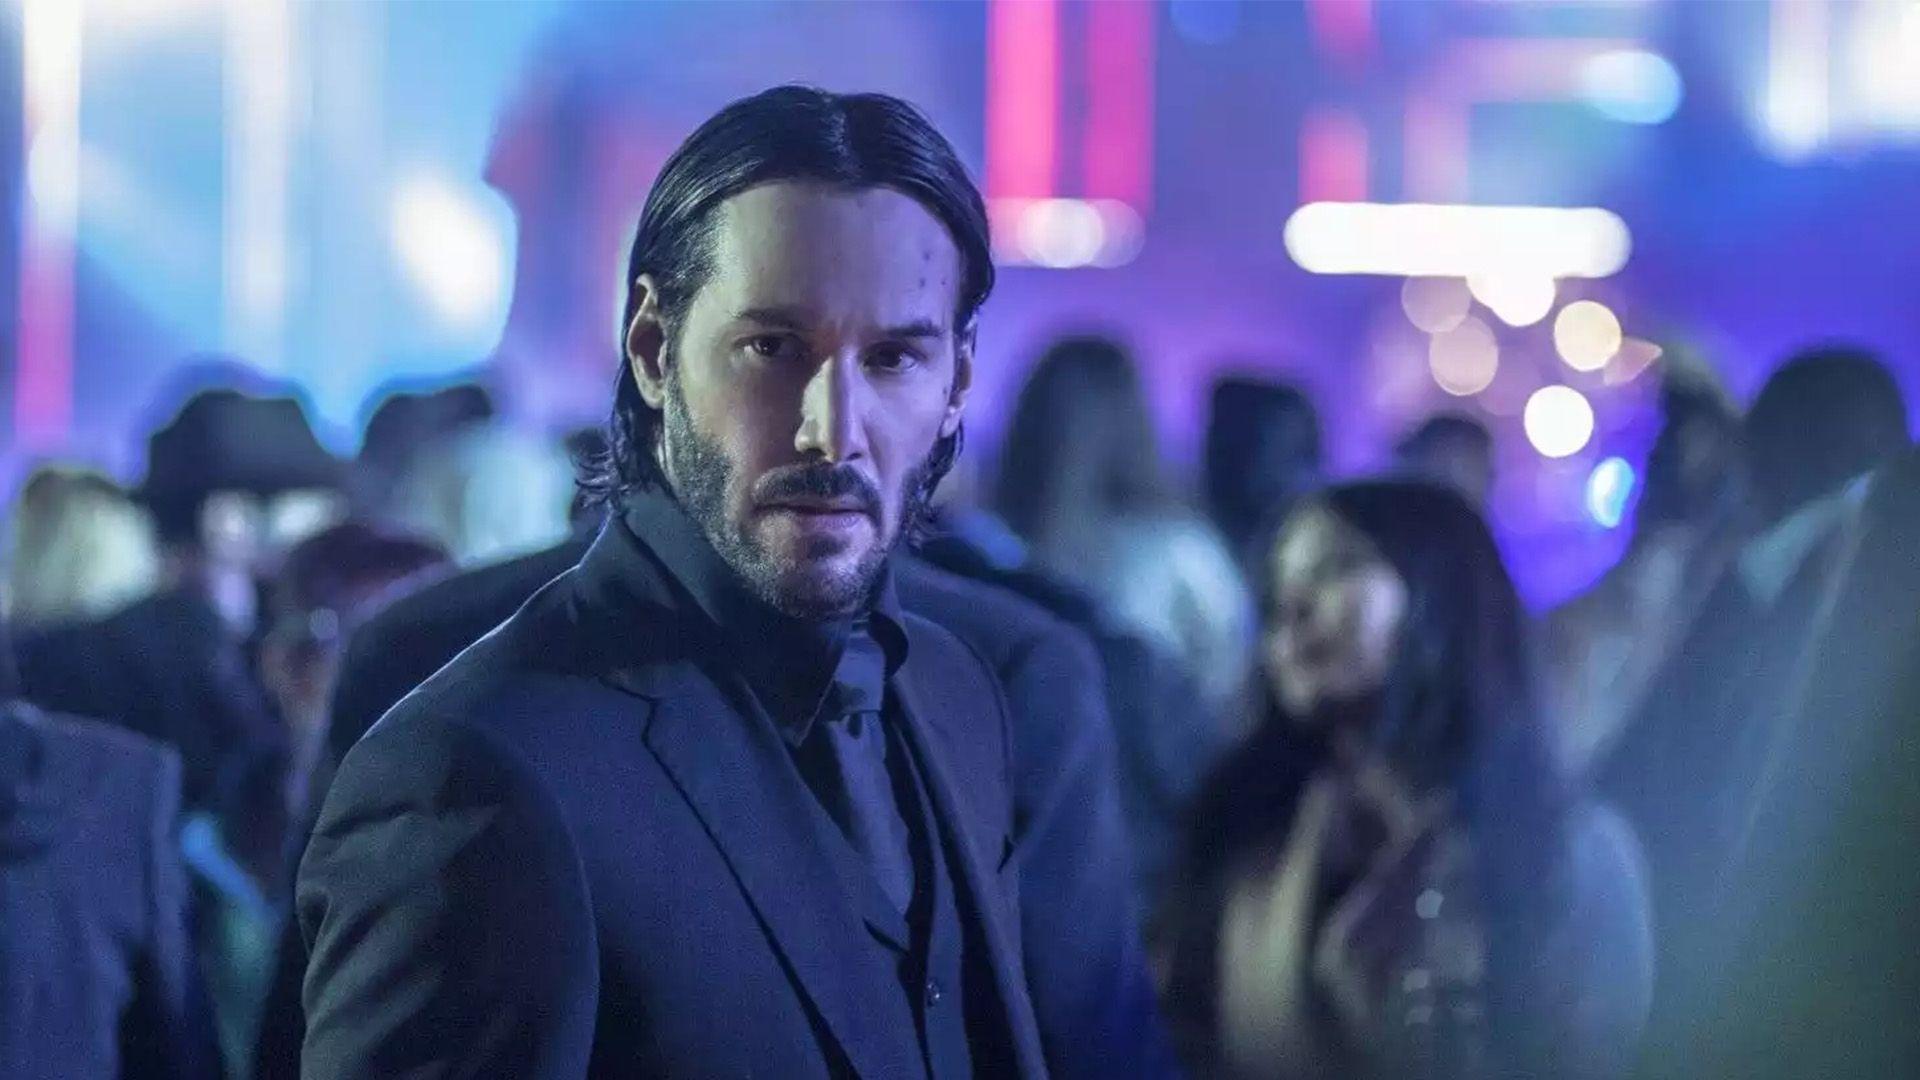 John Wick 3: BTS Photo Offer First Look At New Logo & More